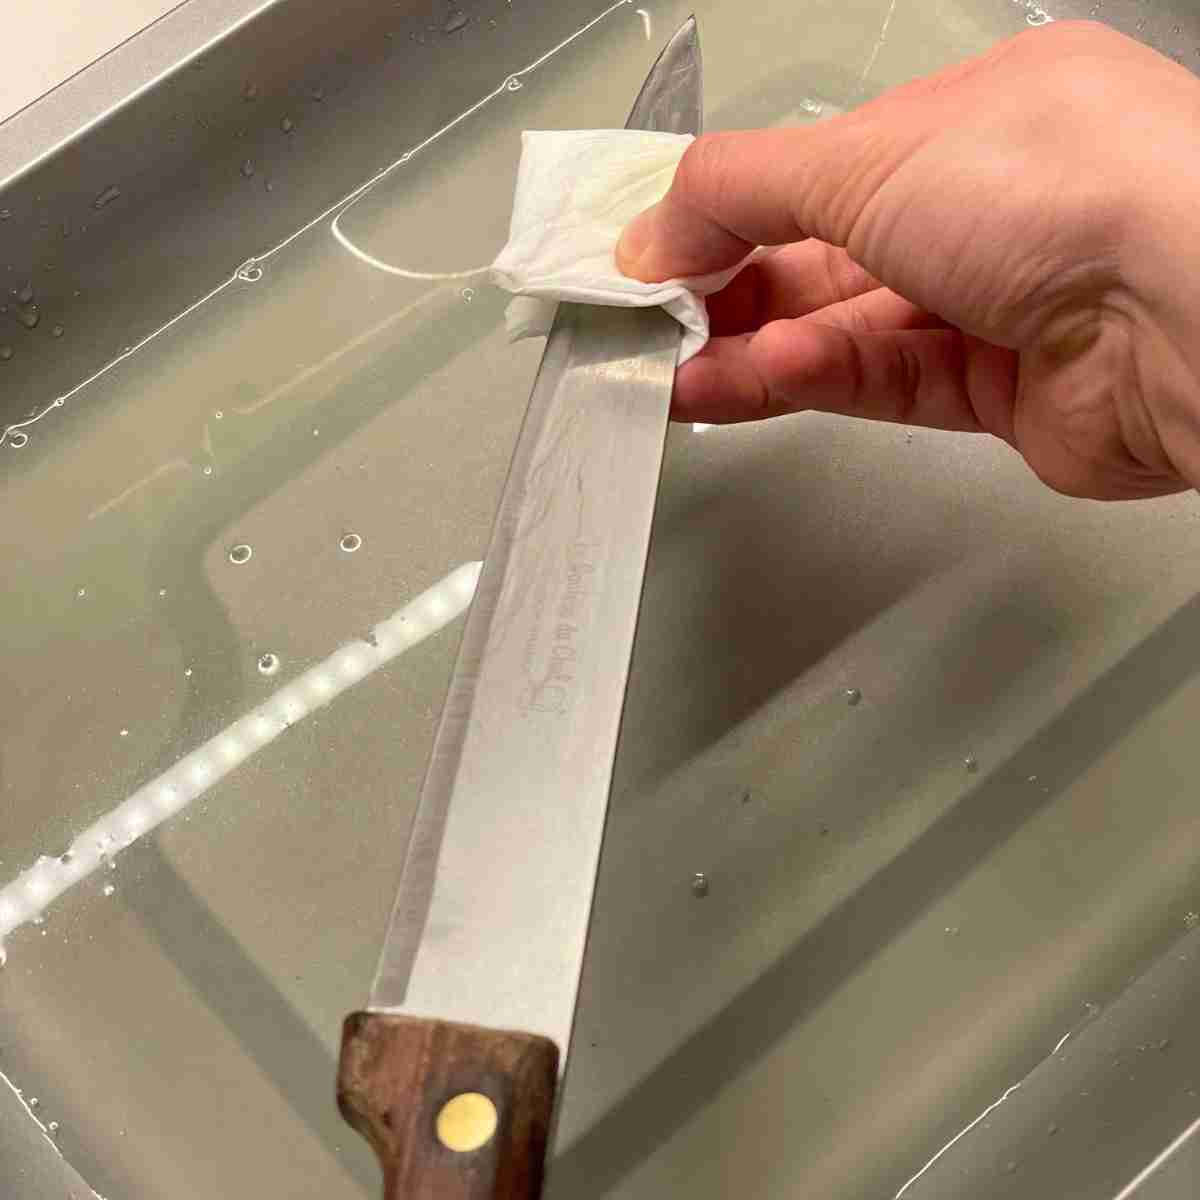 Heat and clean knife after every cut